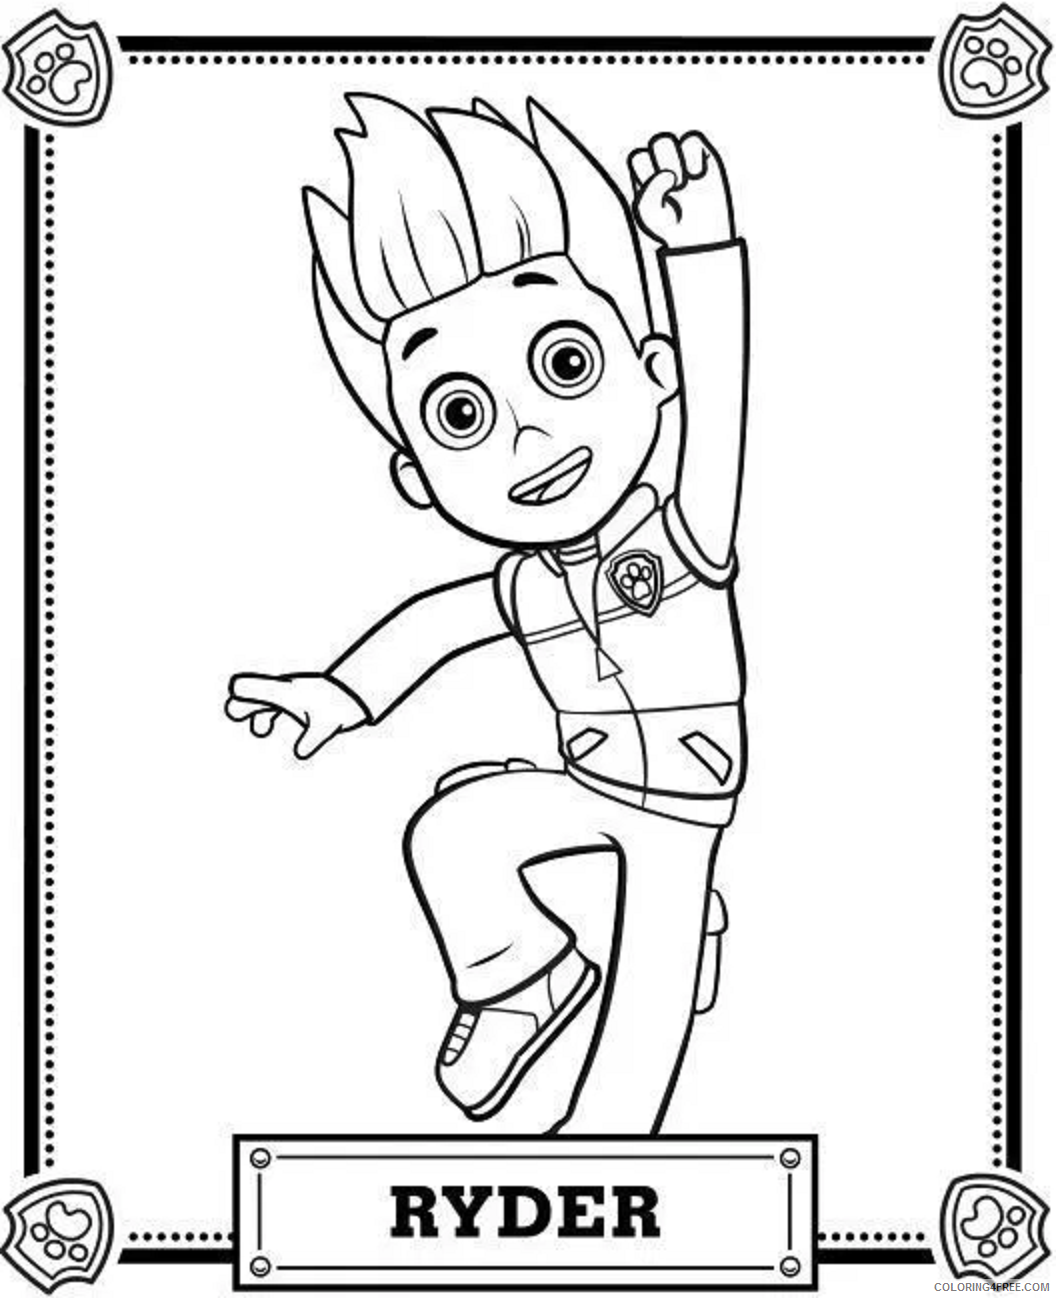 Paw Patrol Coloring Pages TV Film ryder_from_paw_patrol Printable 2020 05886 Coloring4free